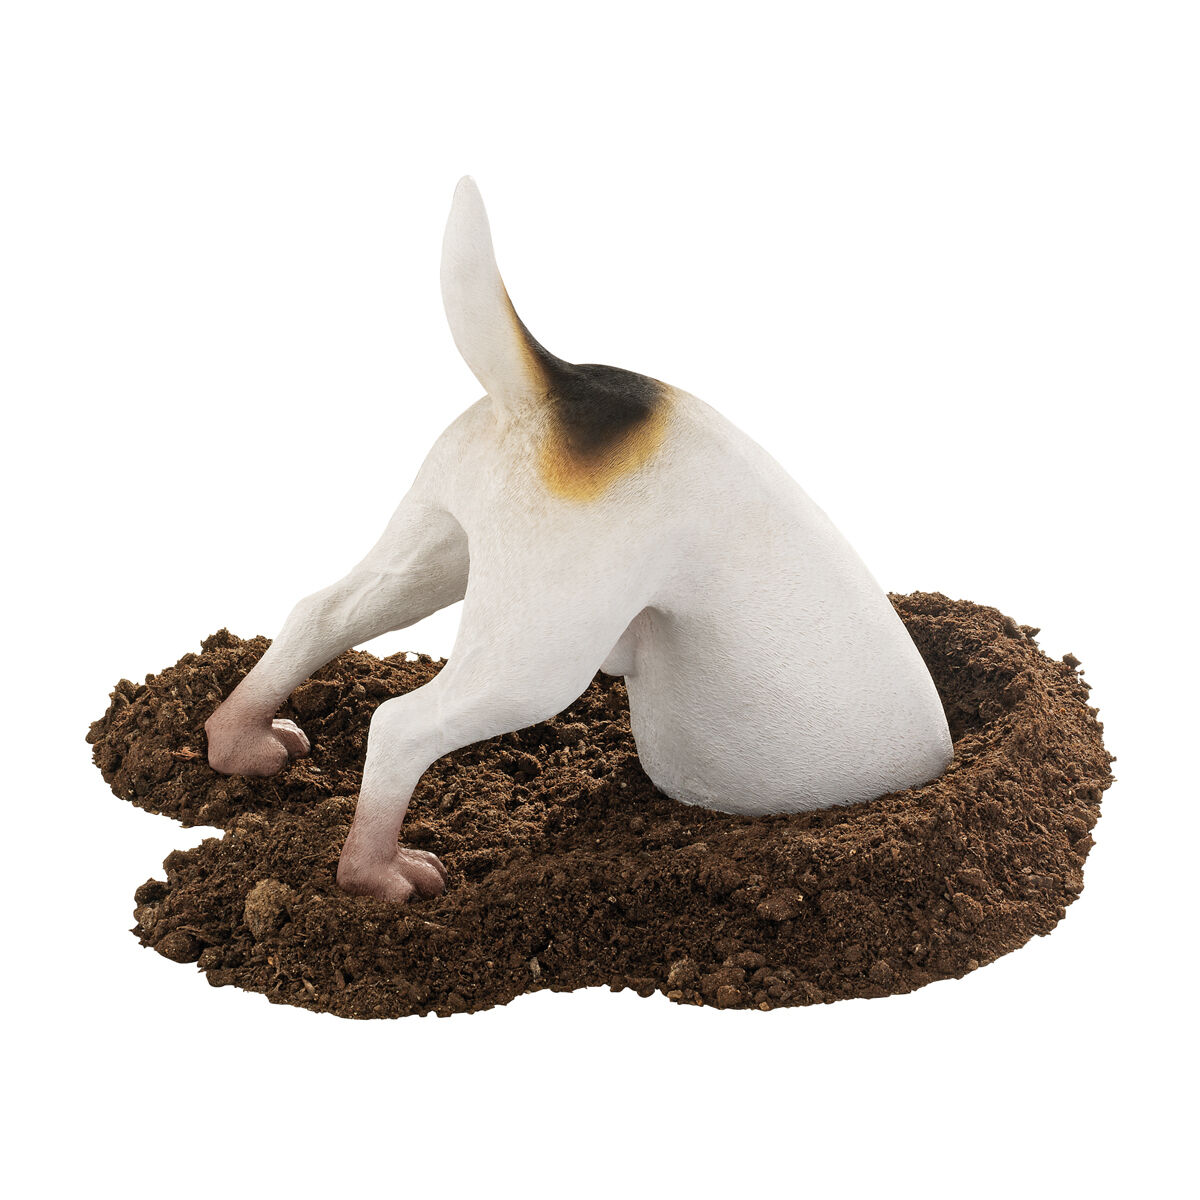 Puppy Dog Terrier Breed Man's Best Friend Digging a Hole Canine Animal Sculpture